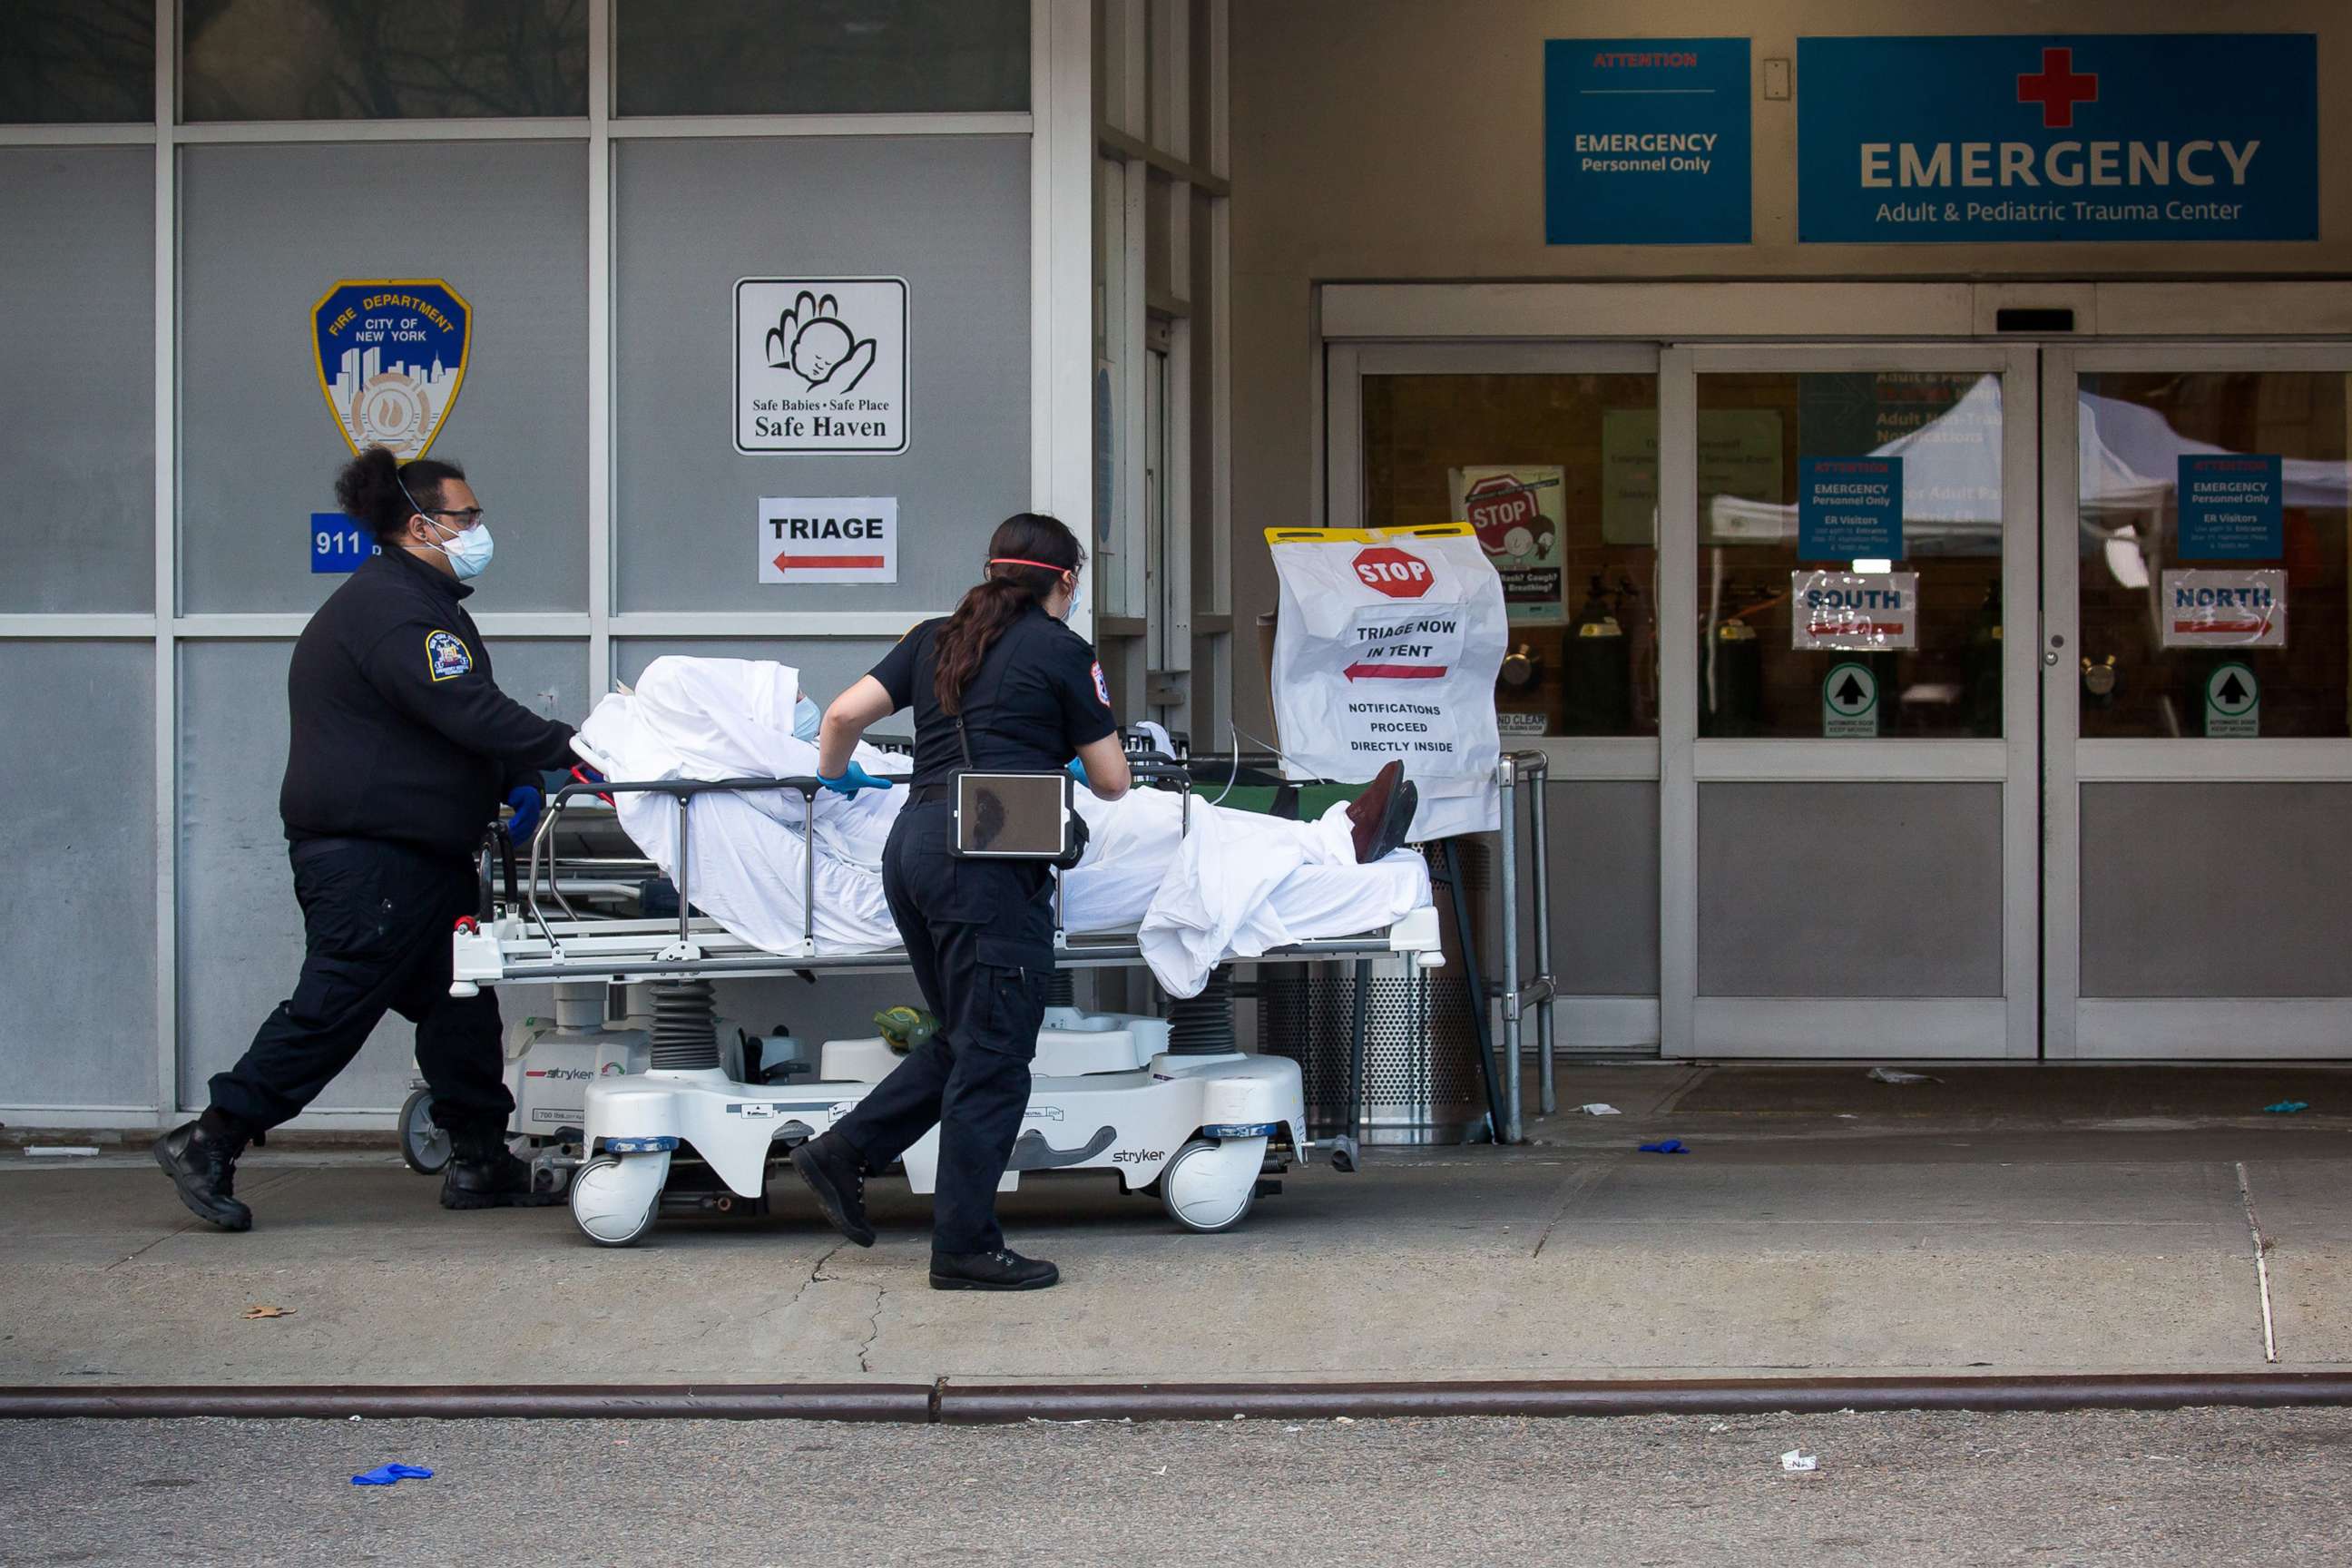 PHOTO: Healthcare workers bring a patient into the emergency room at Maimonides Medical Center during the coronavirus pandemic in Brooklyn, New York, April 8, 2020.